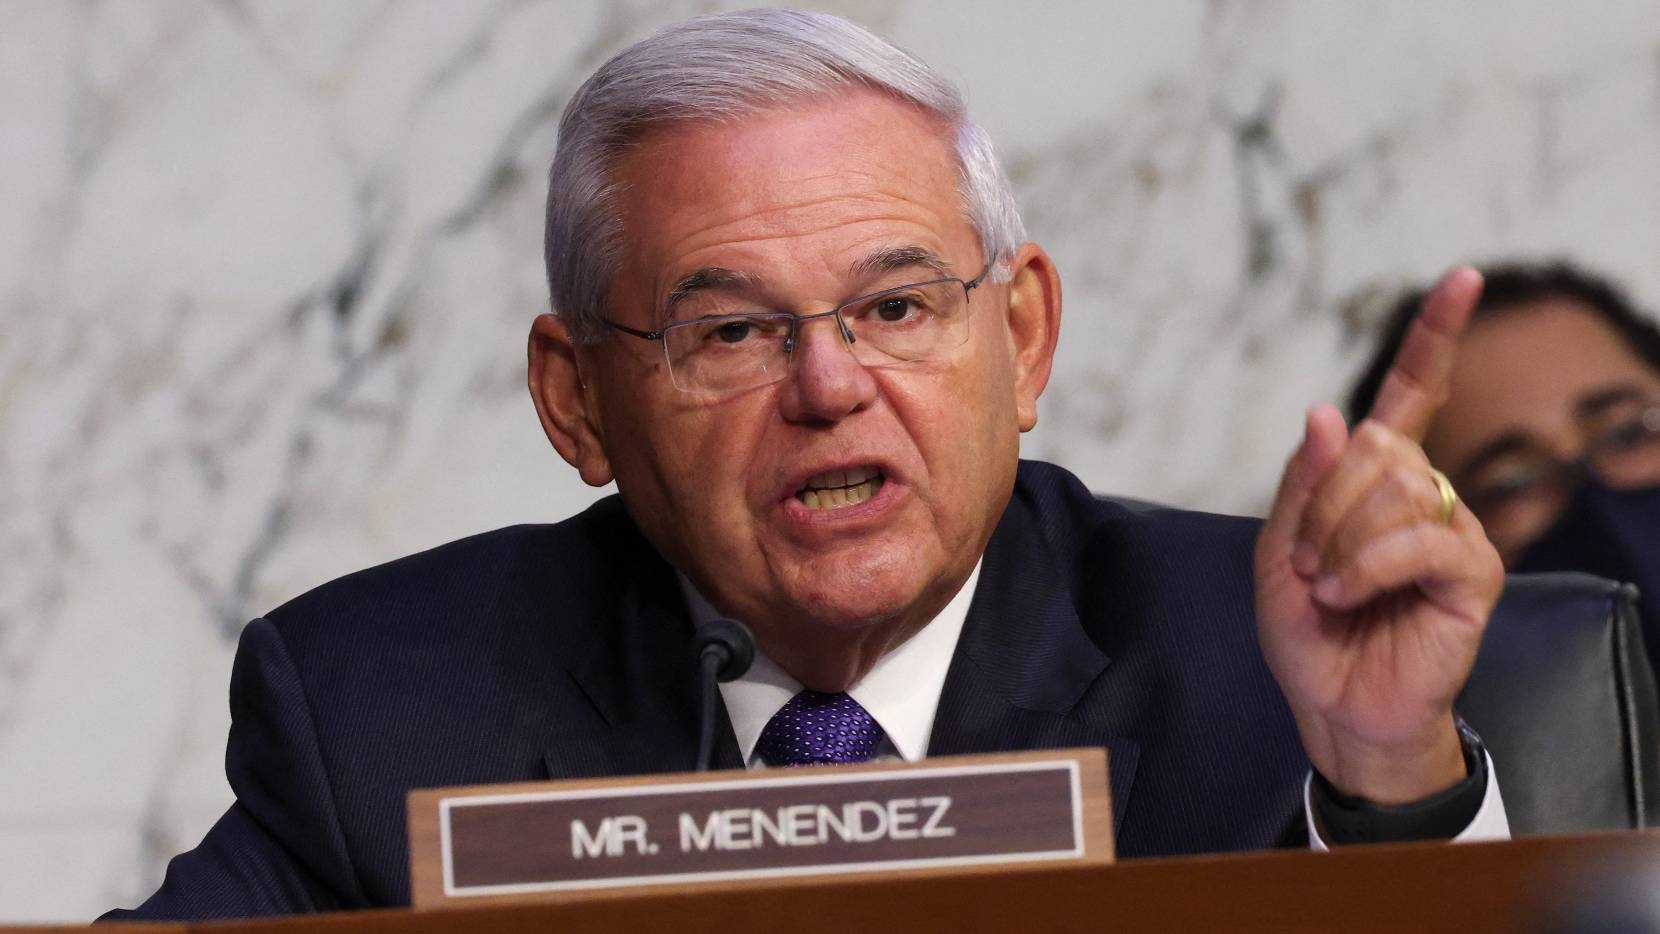 Menendez also introduced another amendment that would end an exemption used to continue providing assistance to the government of Azerbaijan.